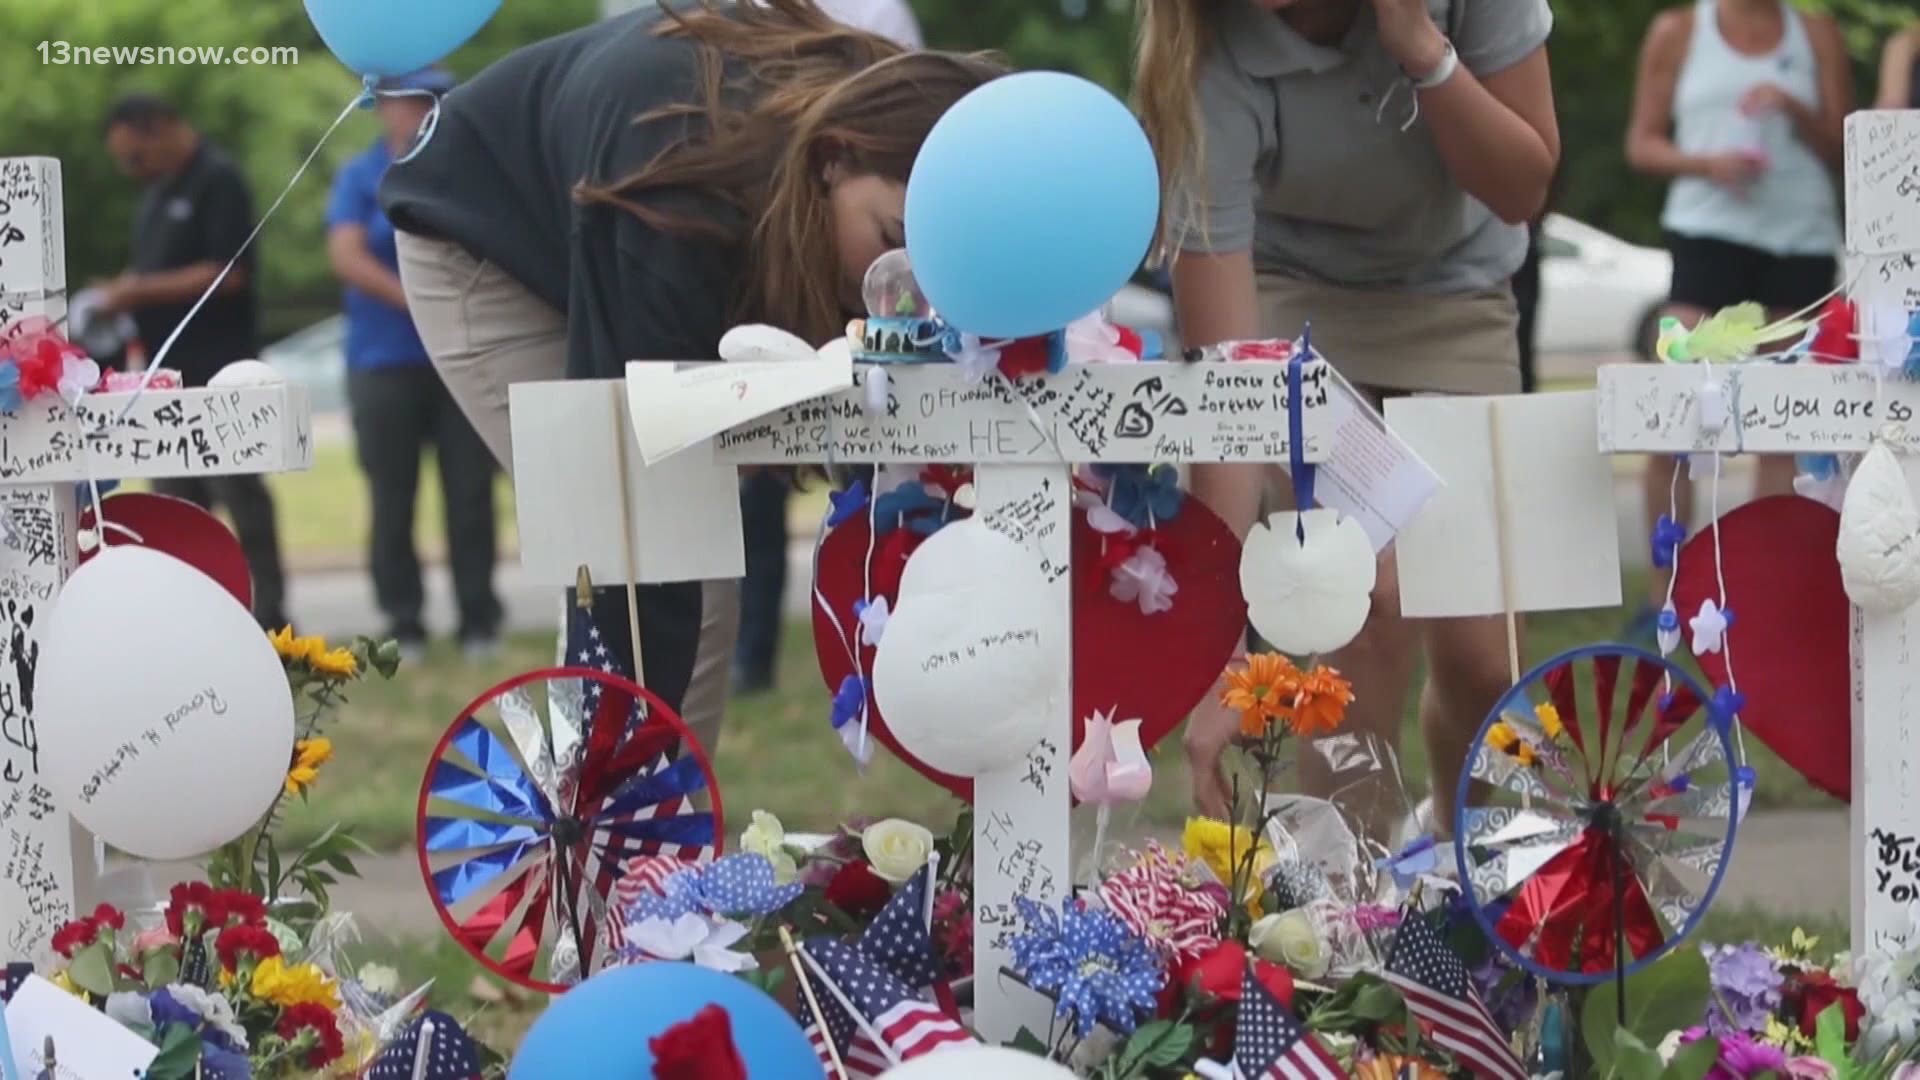 City leaders in Virginia Beach are discussing how to create a permanent memorial for victims of the Municipal Center mass shooting last May.